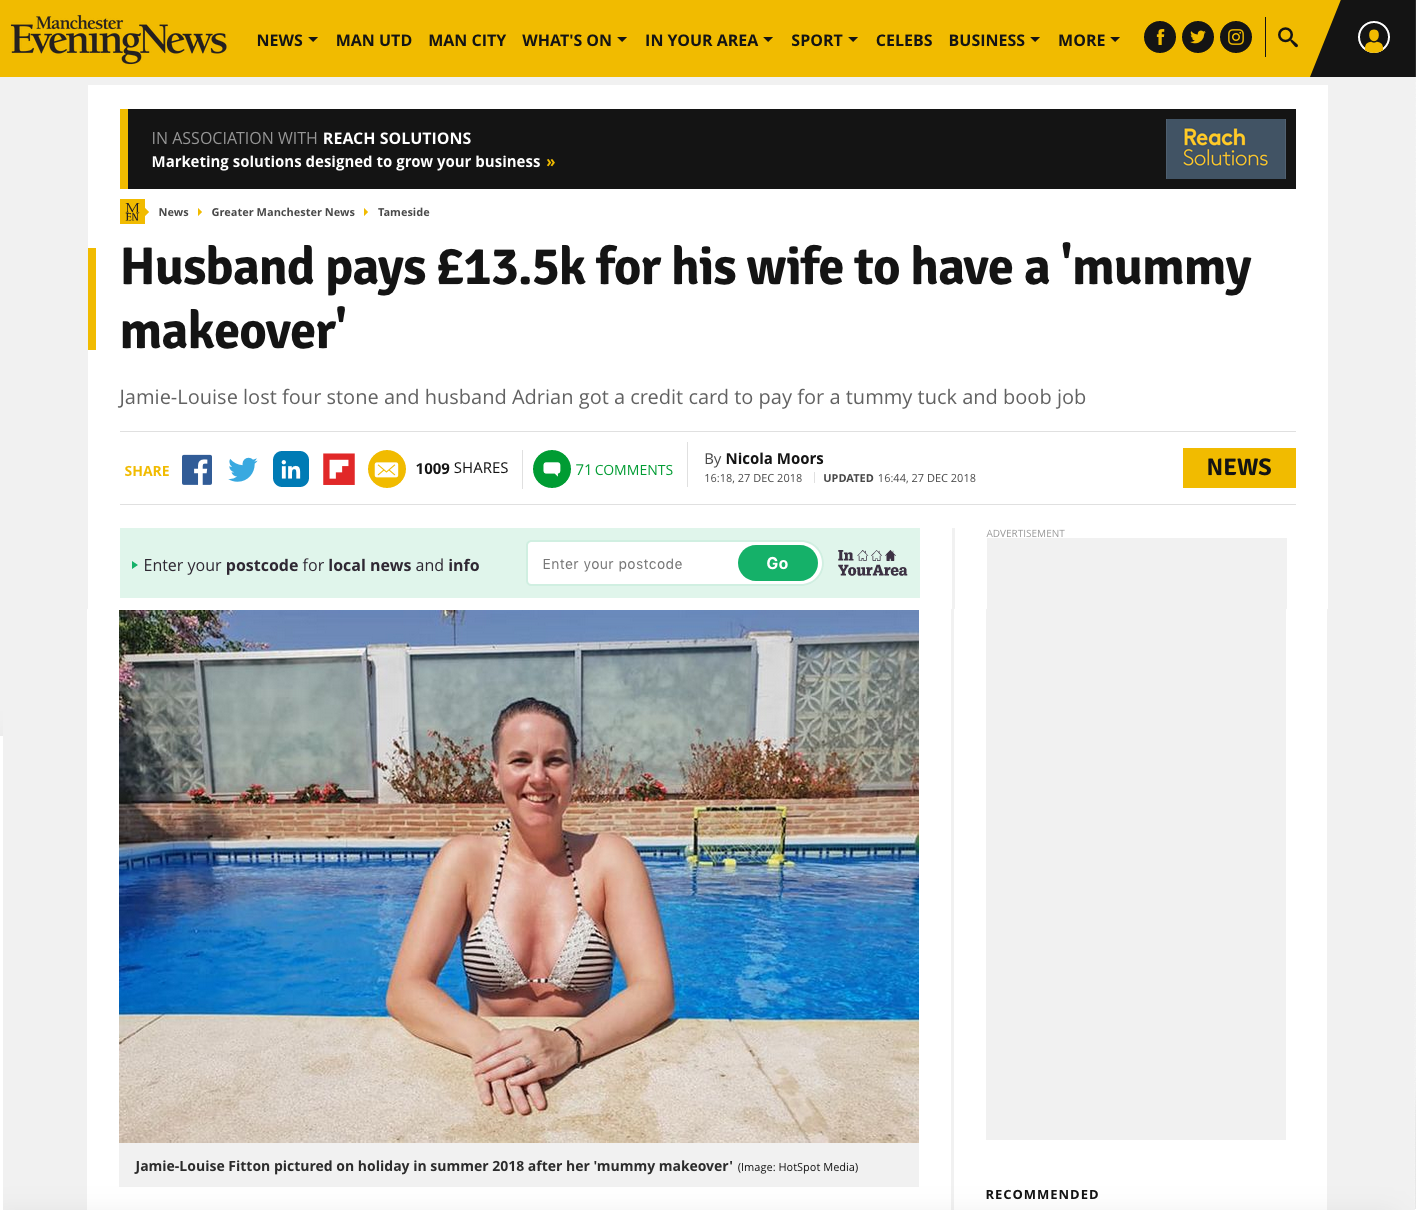 Husband pays £13.5k for his wife to have a ‘mummy makeover’